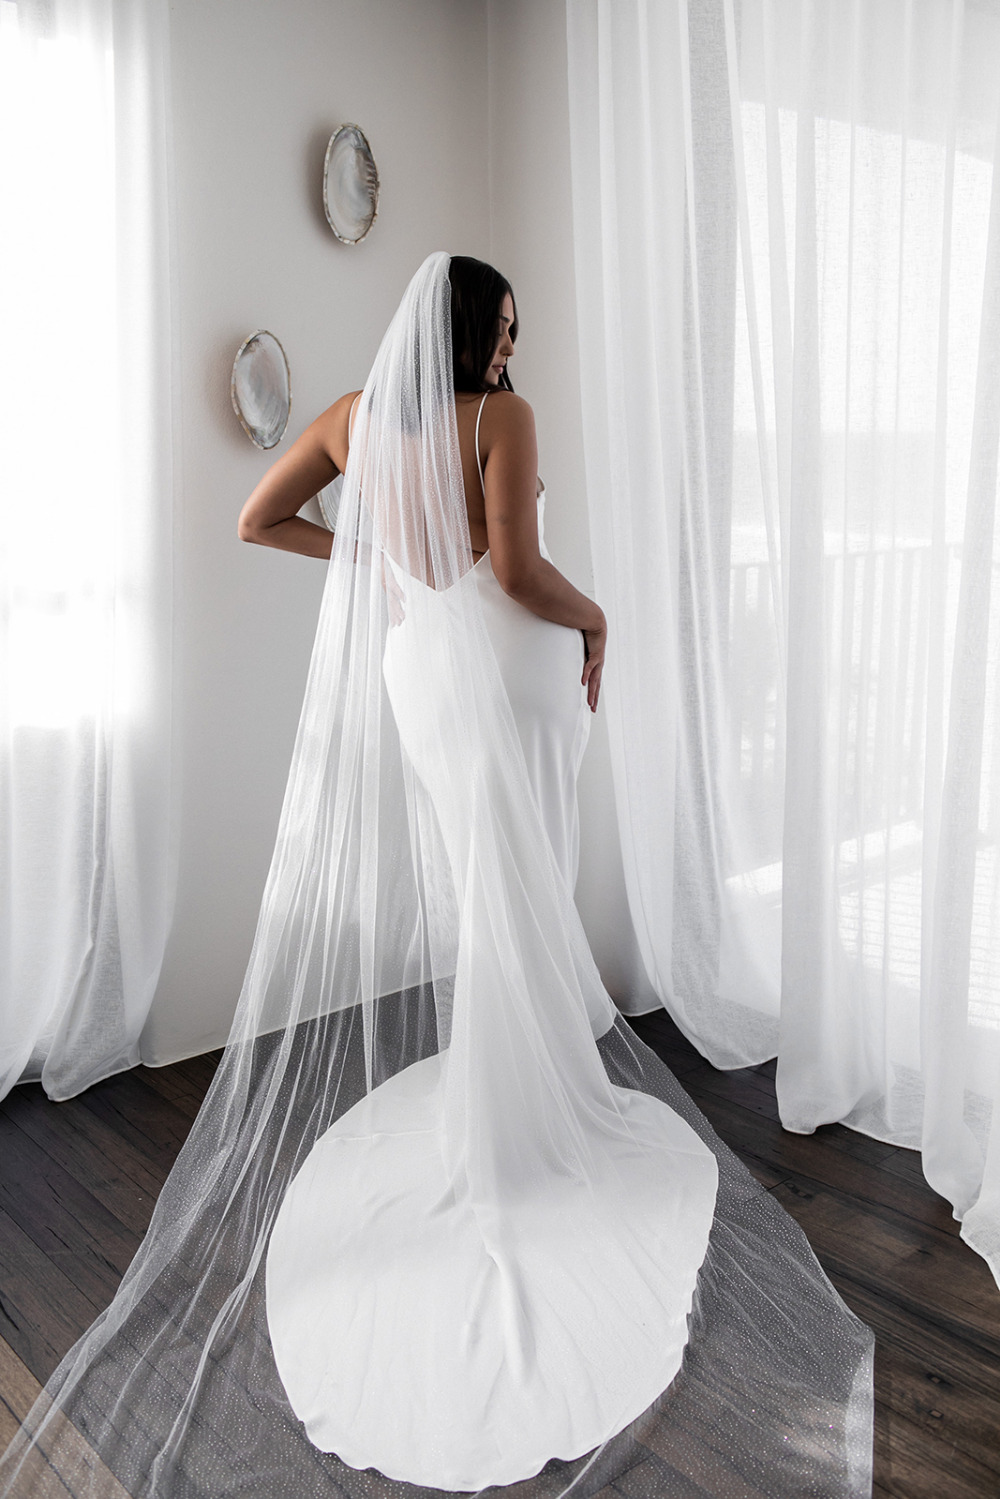 grace-loves-laceshopveils-and-hairshimmy-veil_203